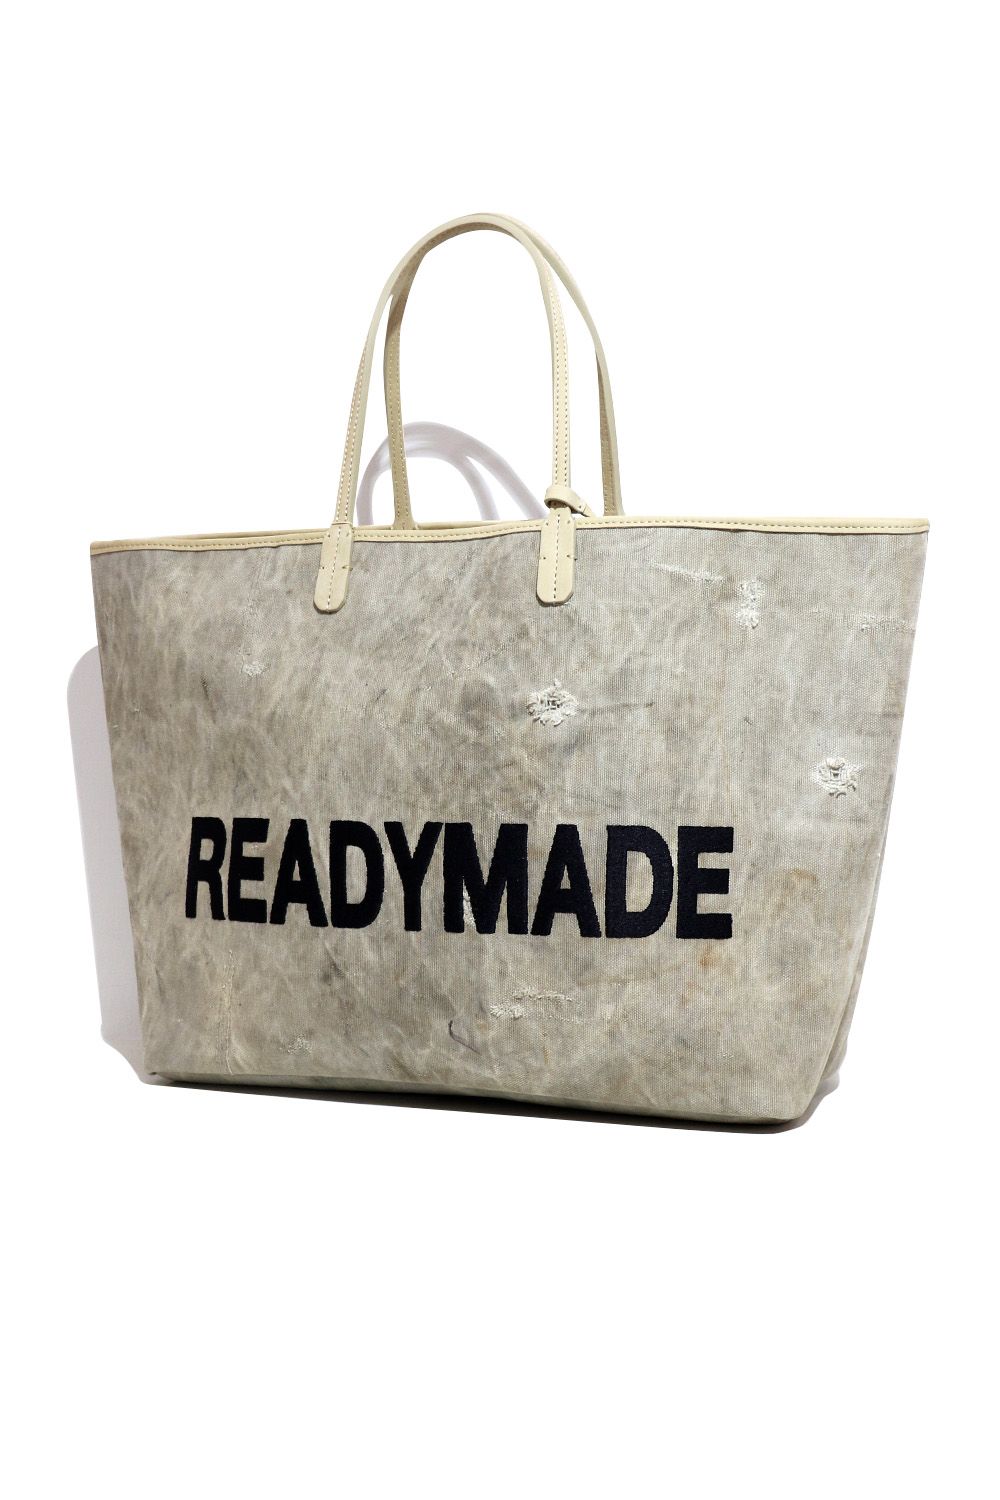 READYMADE DOROTHY BAG M ドロシー バッグ カーキ 緑